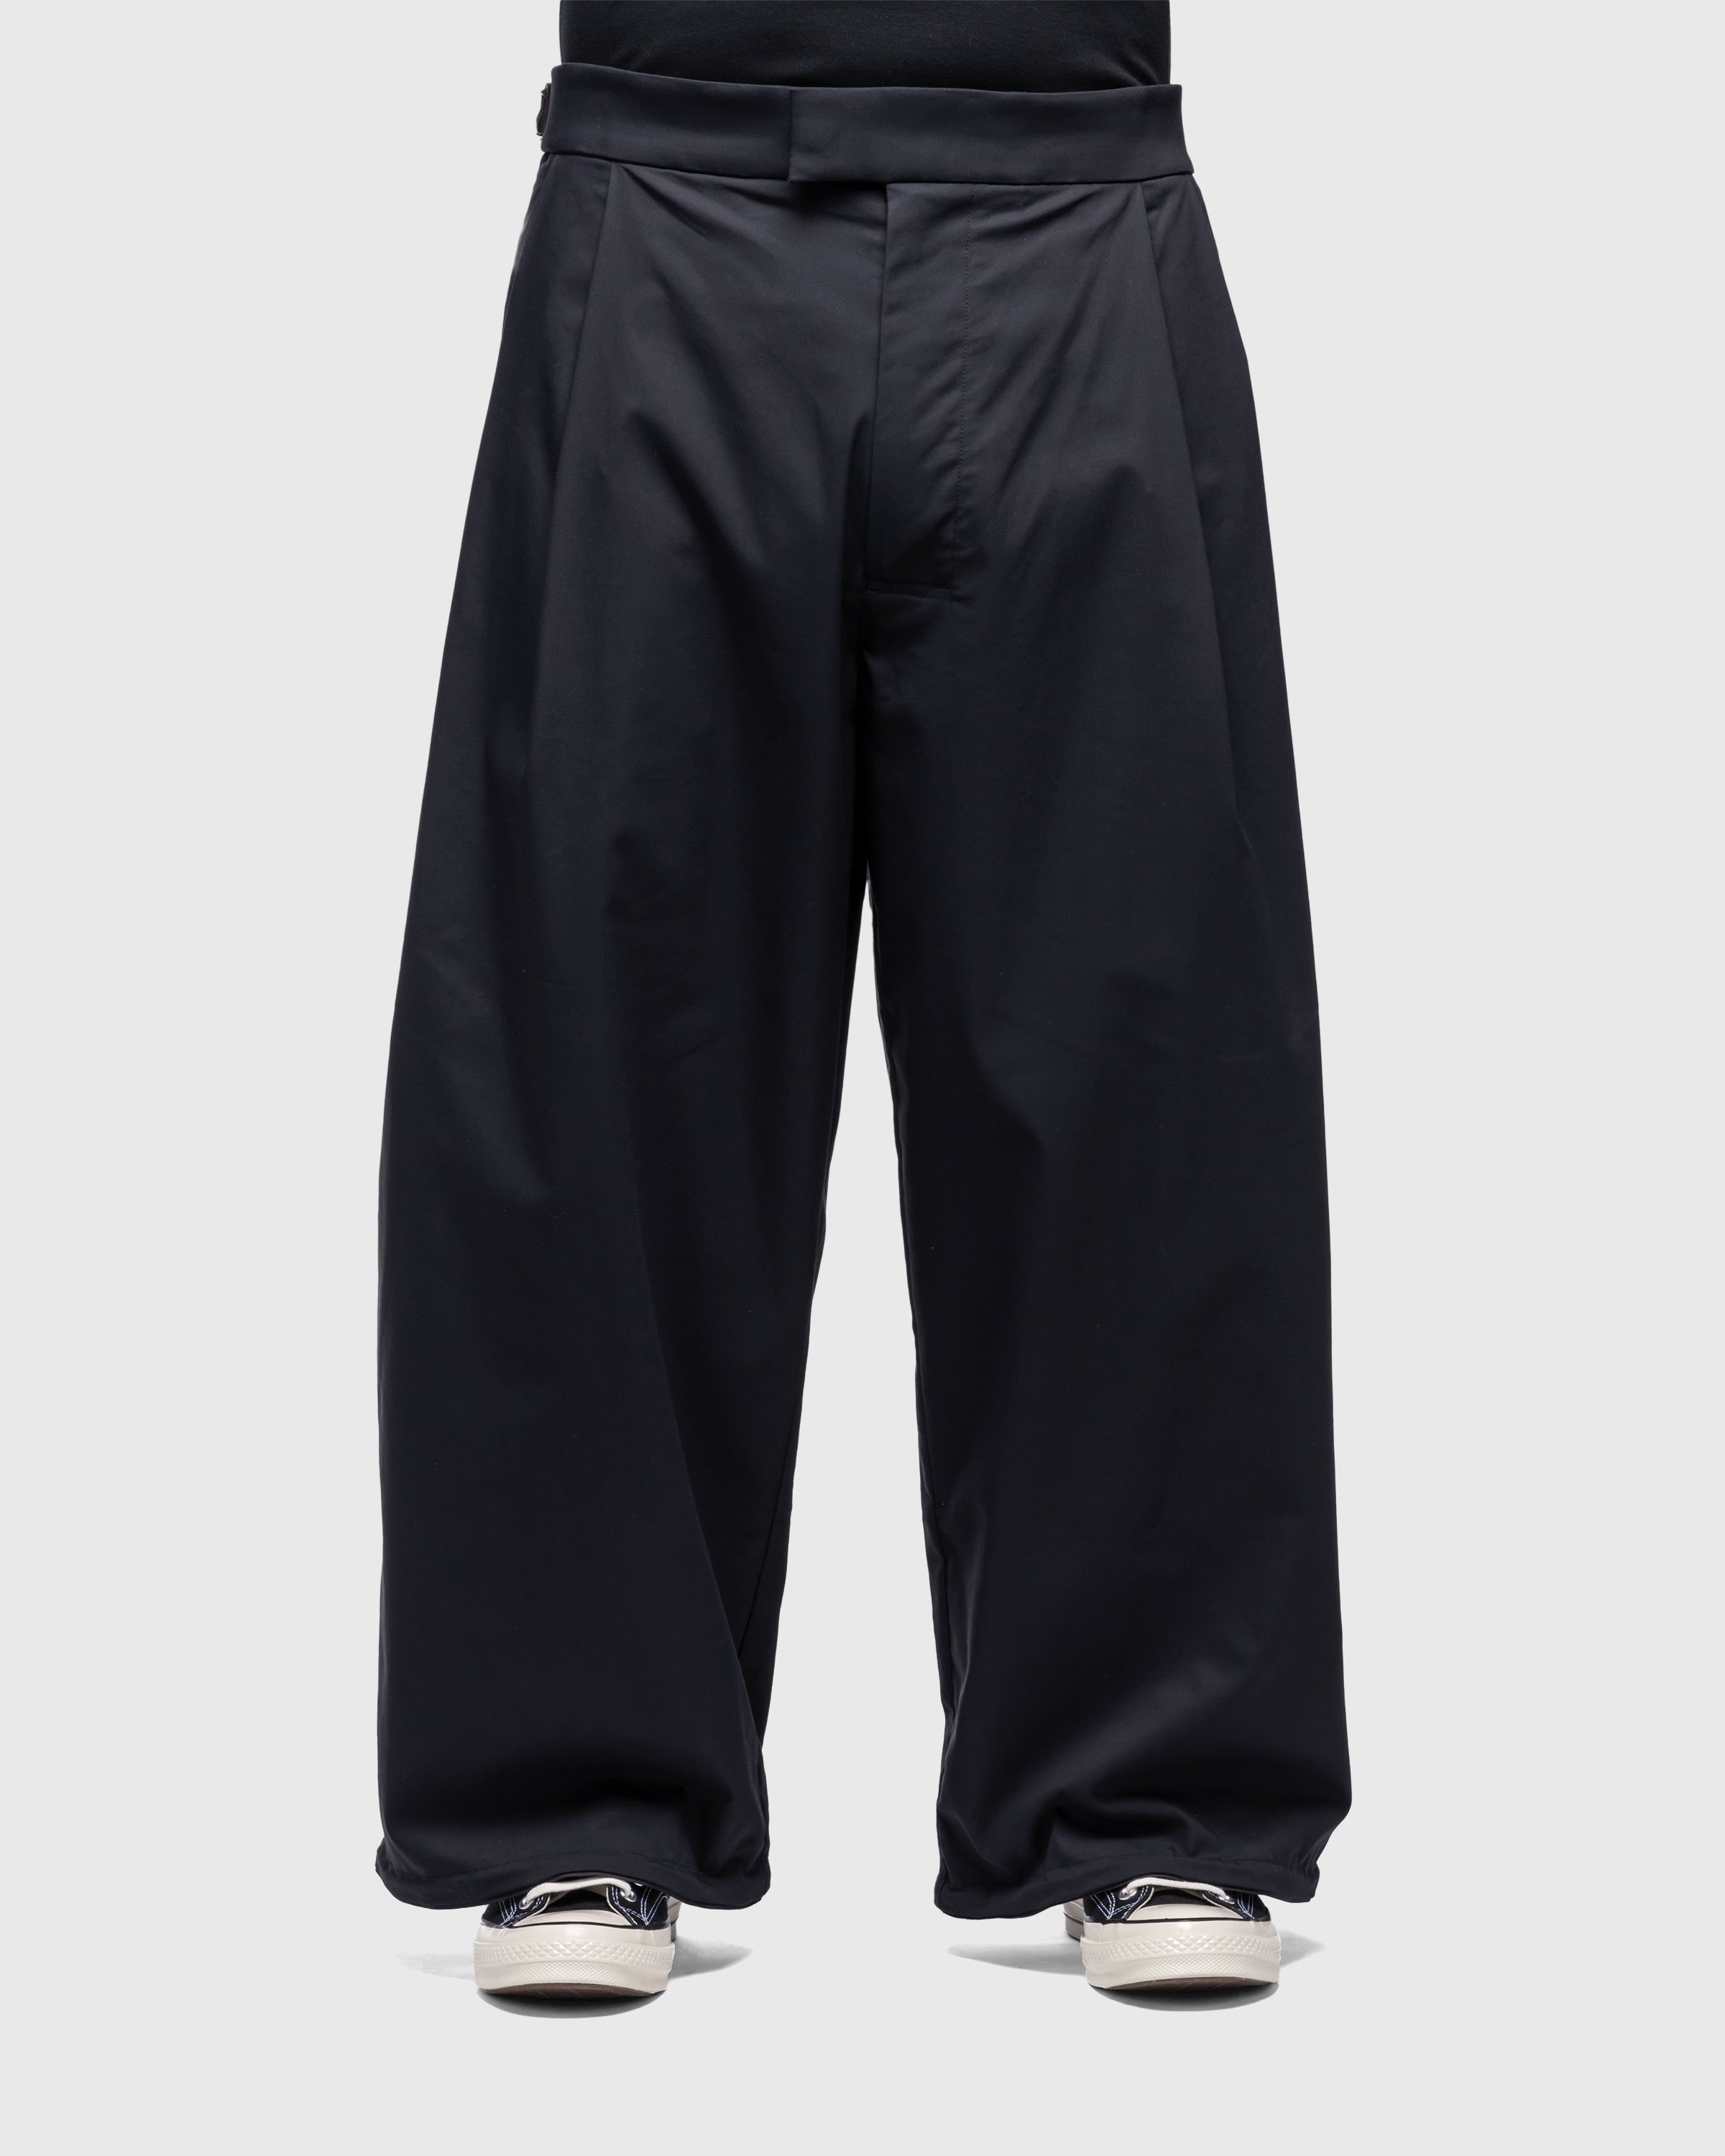 ACRONYM - P48-CH Micro Twill Pleated Trouser Black - Clothing - Black - Image 2